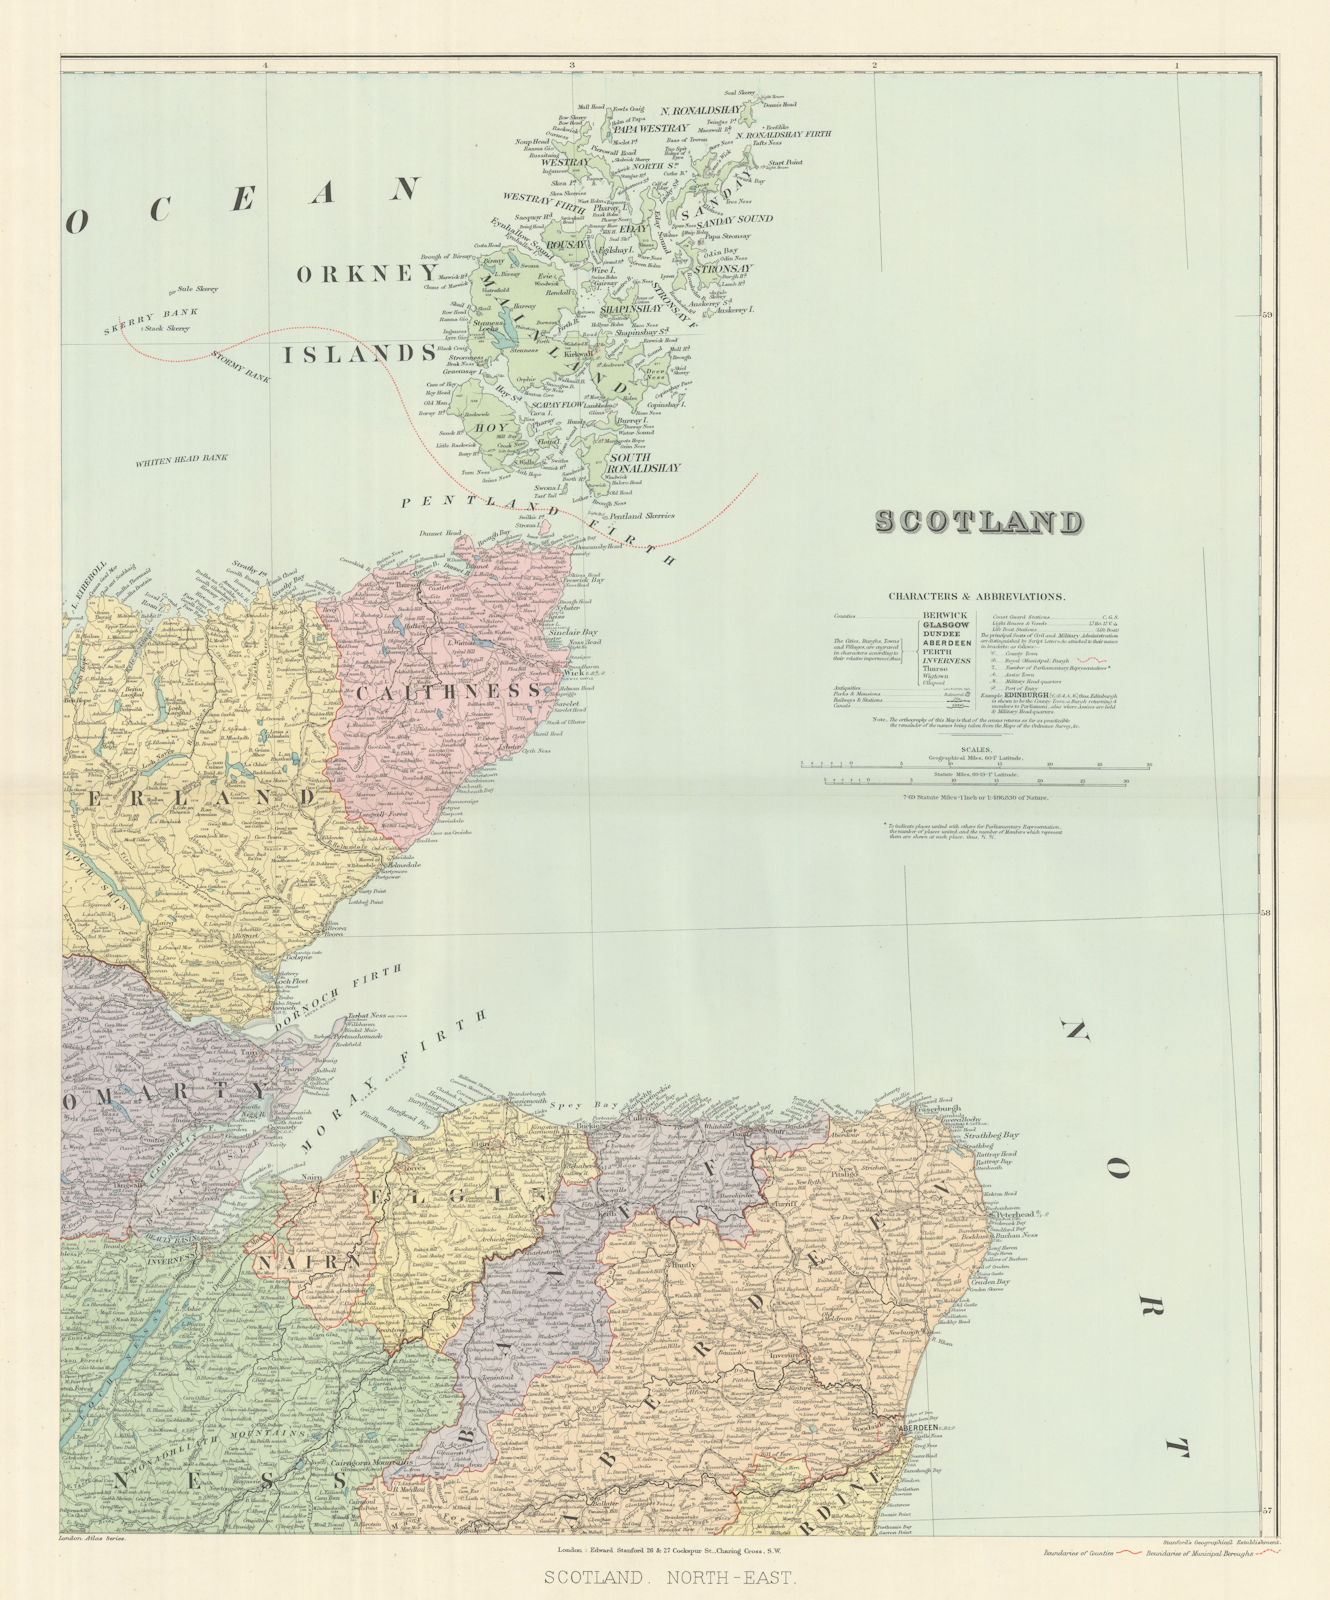 Scotland N.E. Orkney Cathiness Banff Elgin Aberdeen Sutherland STANFORD 1894 map